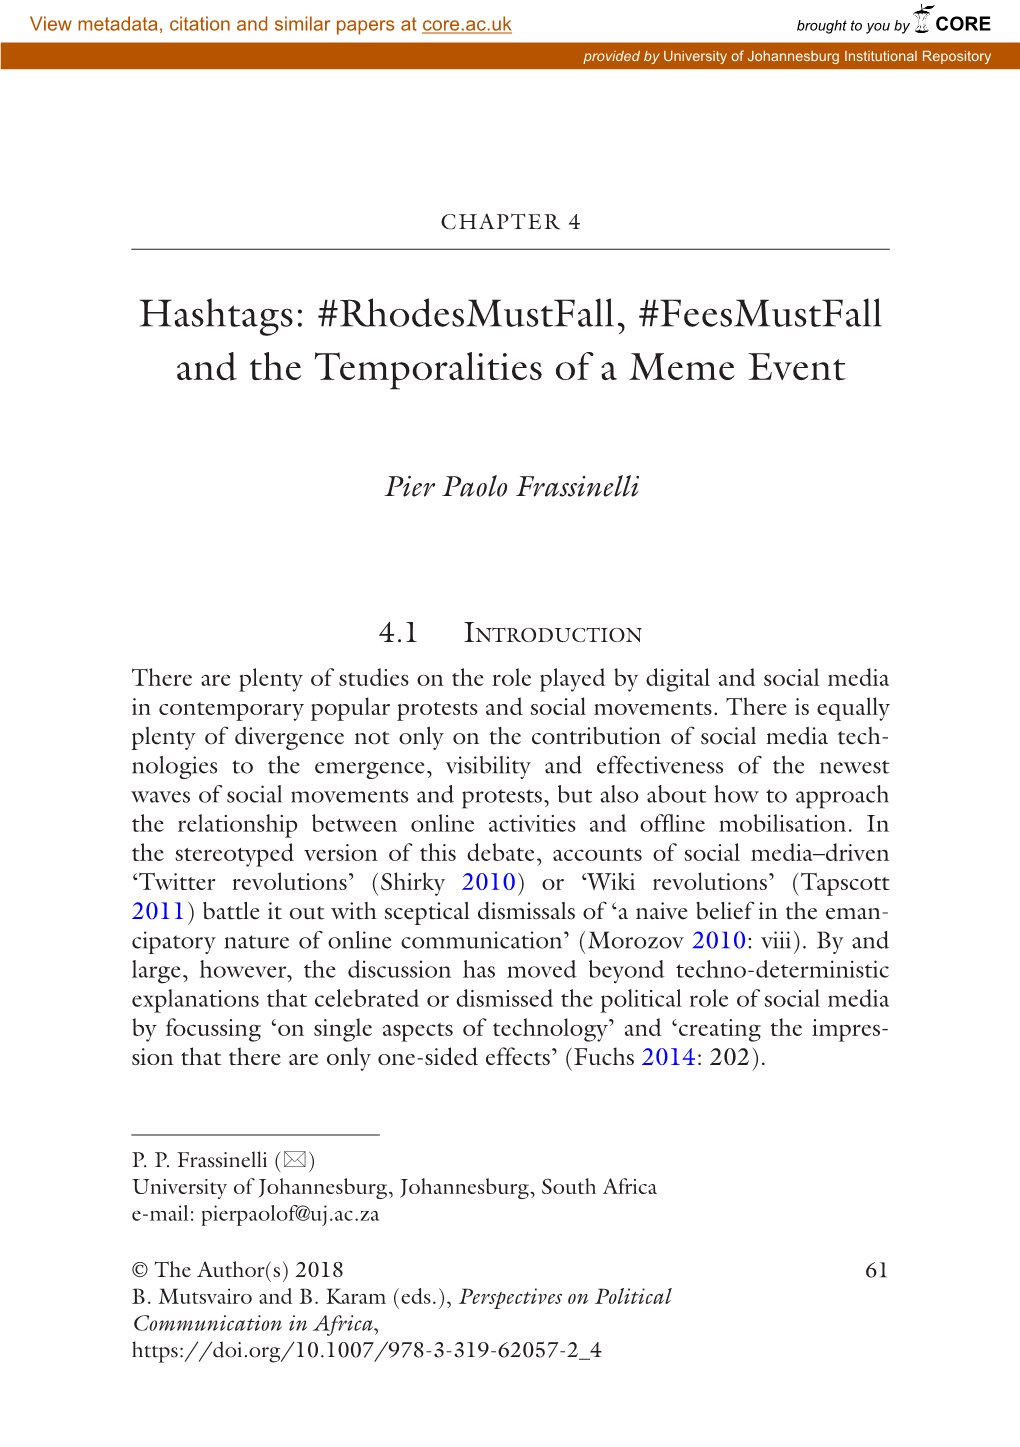 Hashtags: #Rhodesmustfall, #Feesmustfall and the Temporalities of a Meme Event